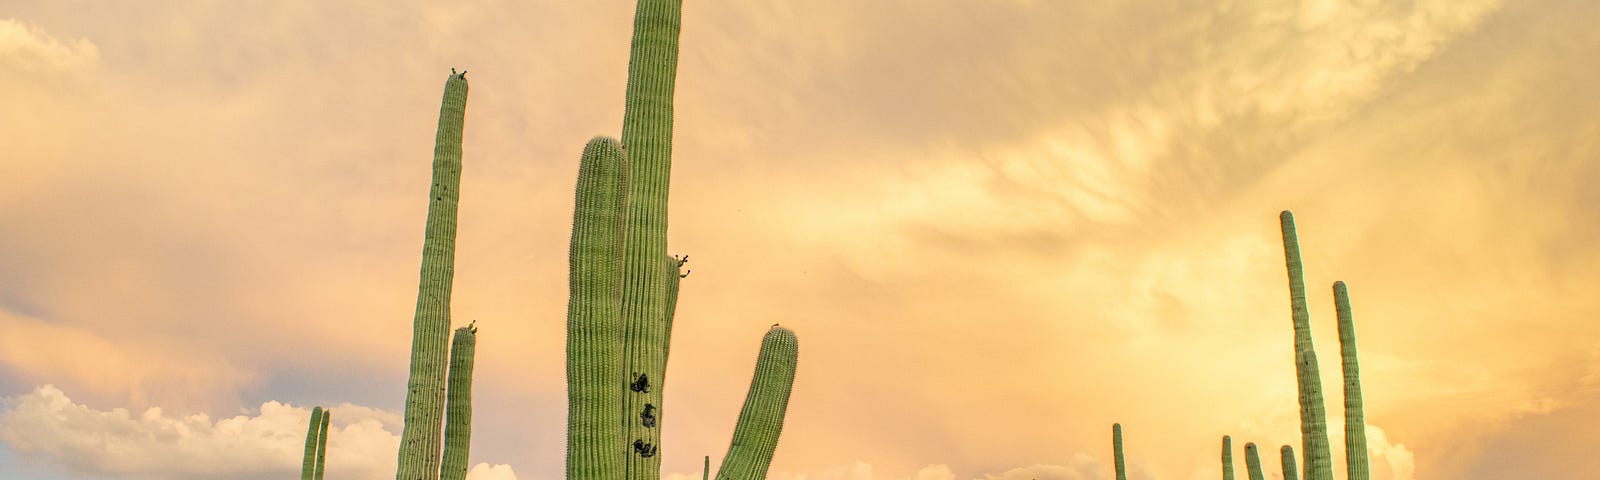 Cacti in the Sonoran Desert against a multicolored cloudy sky.